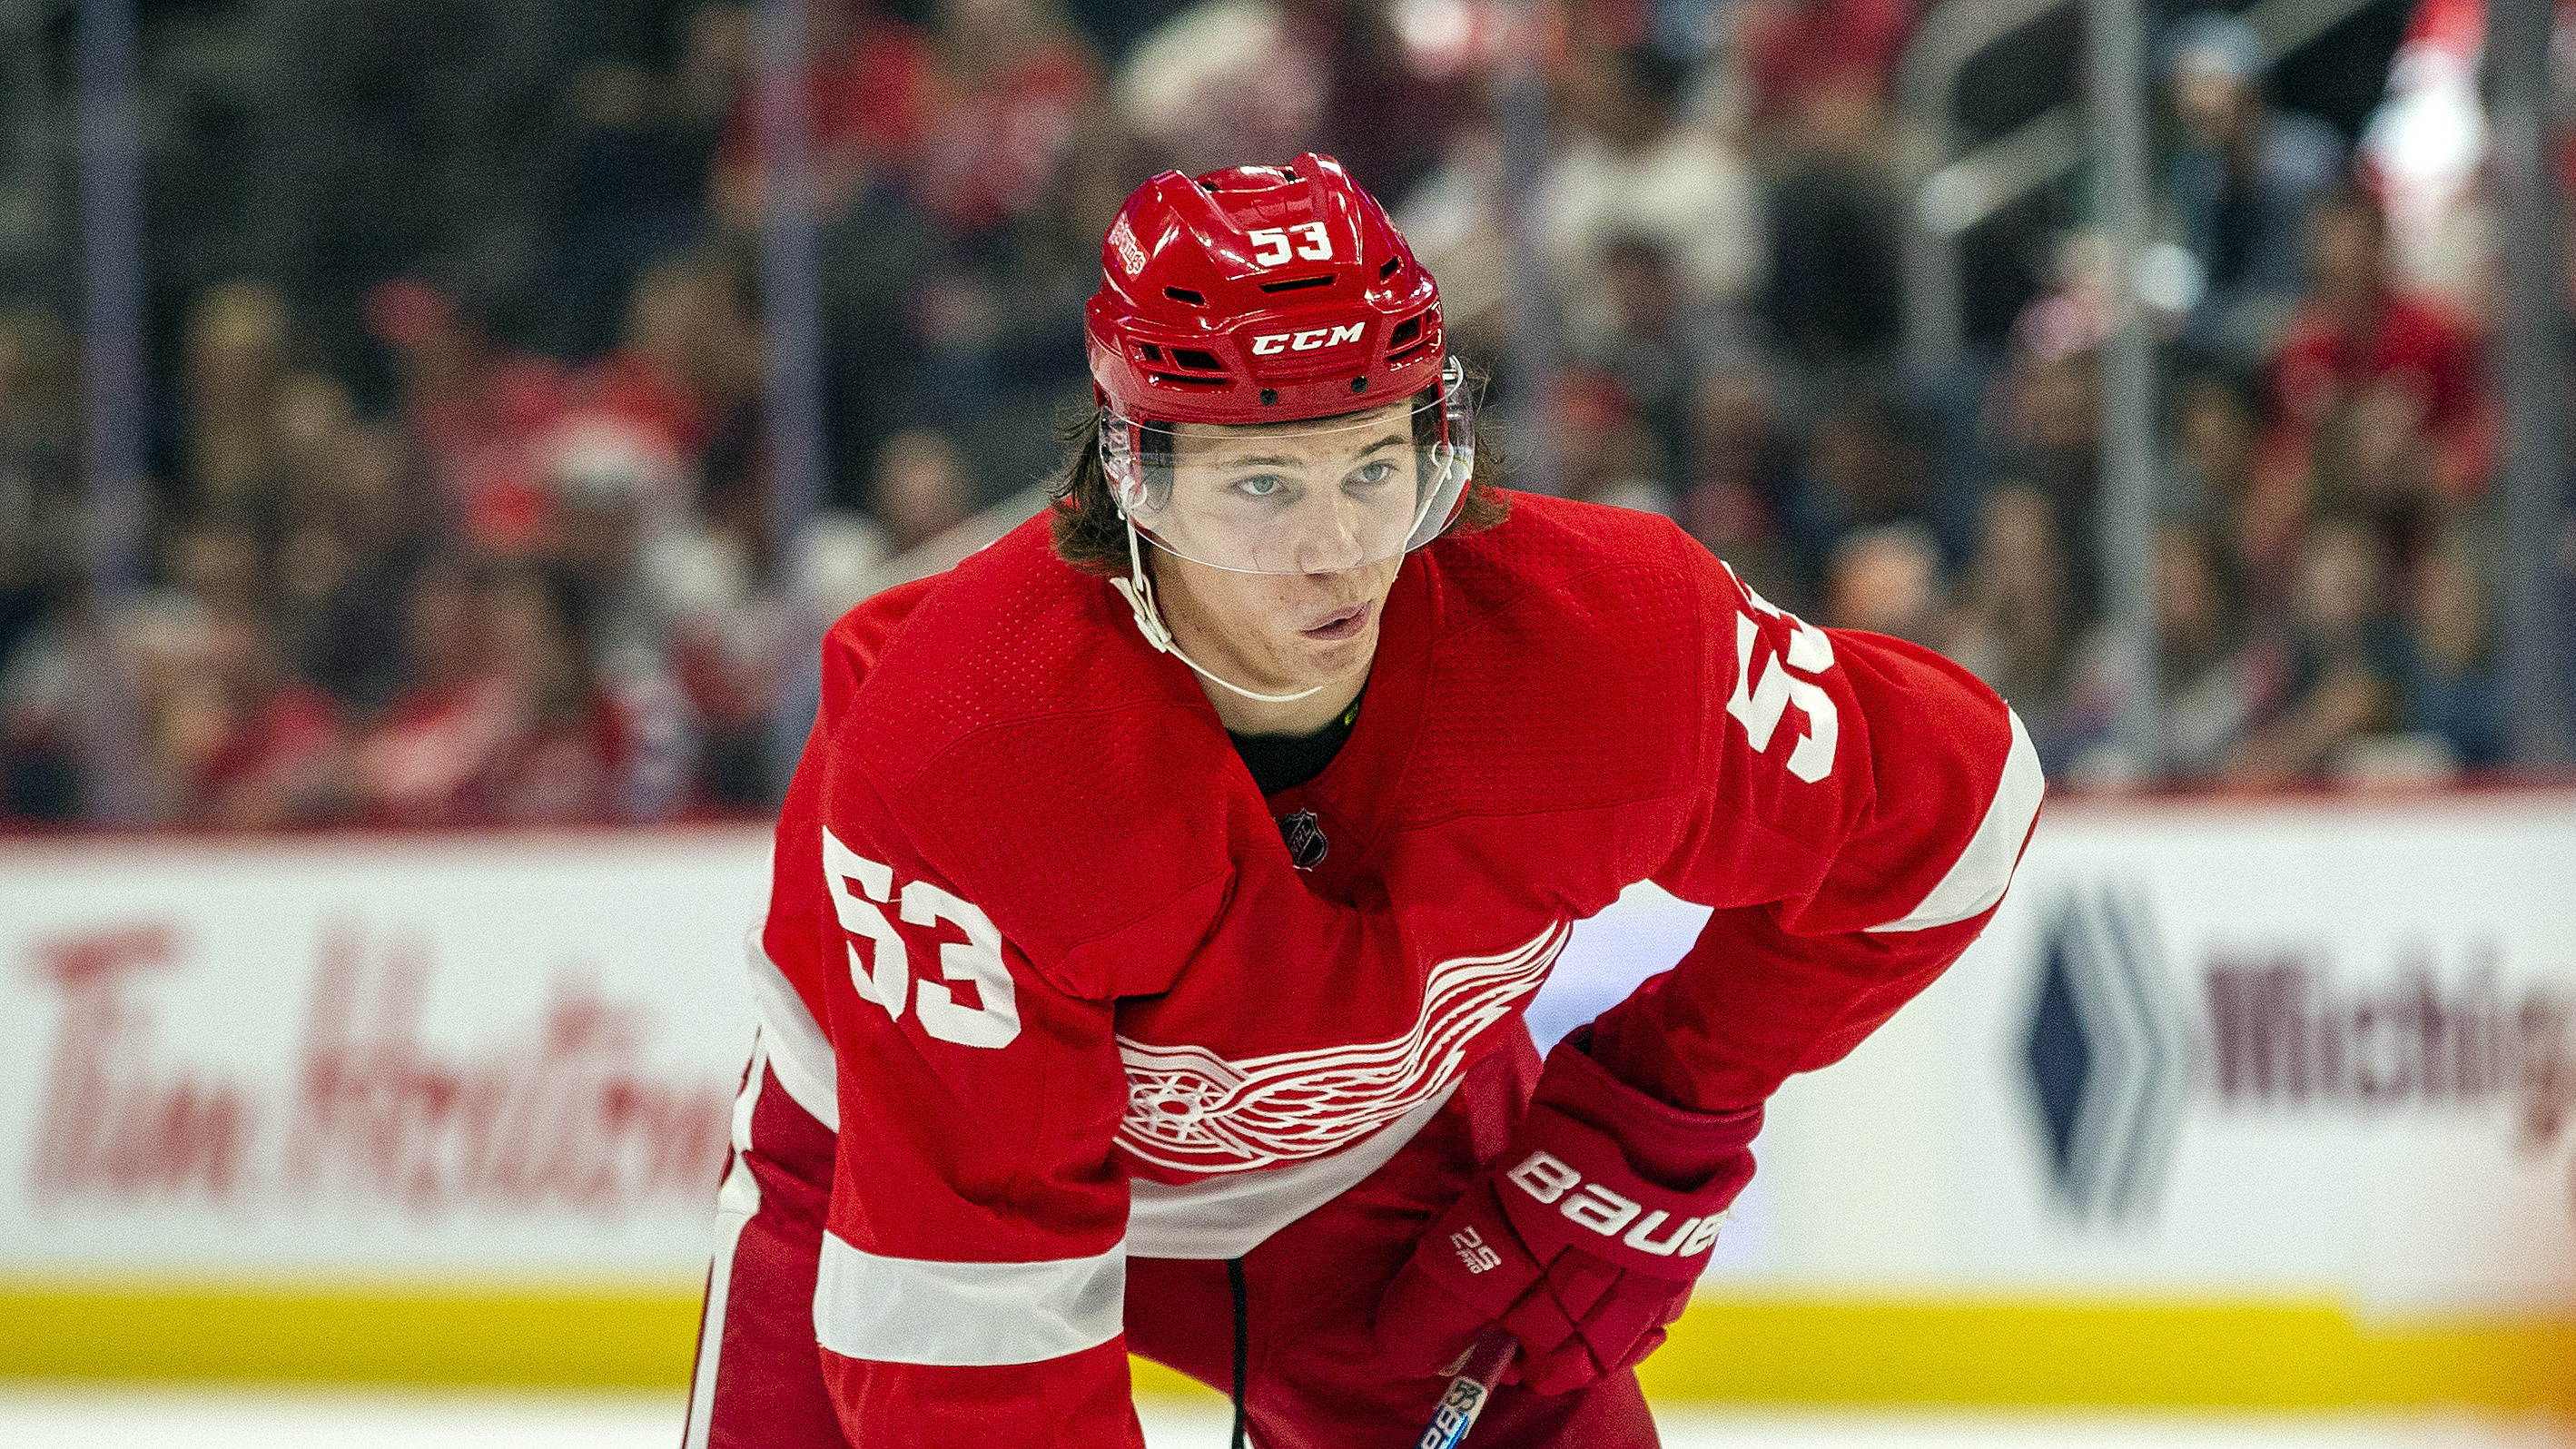 Detroit Red Wings: Moritz Seider not participating in Prospect